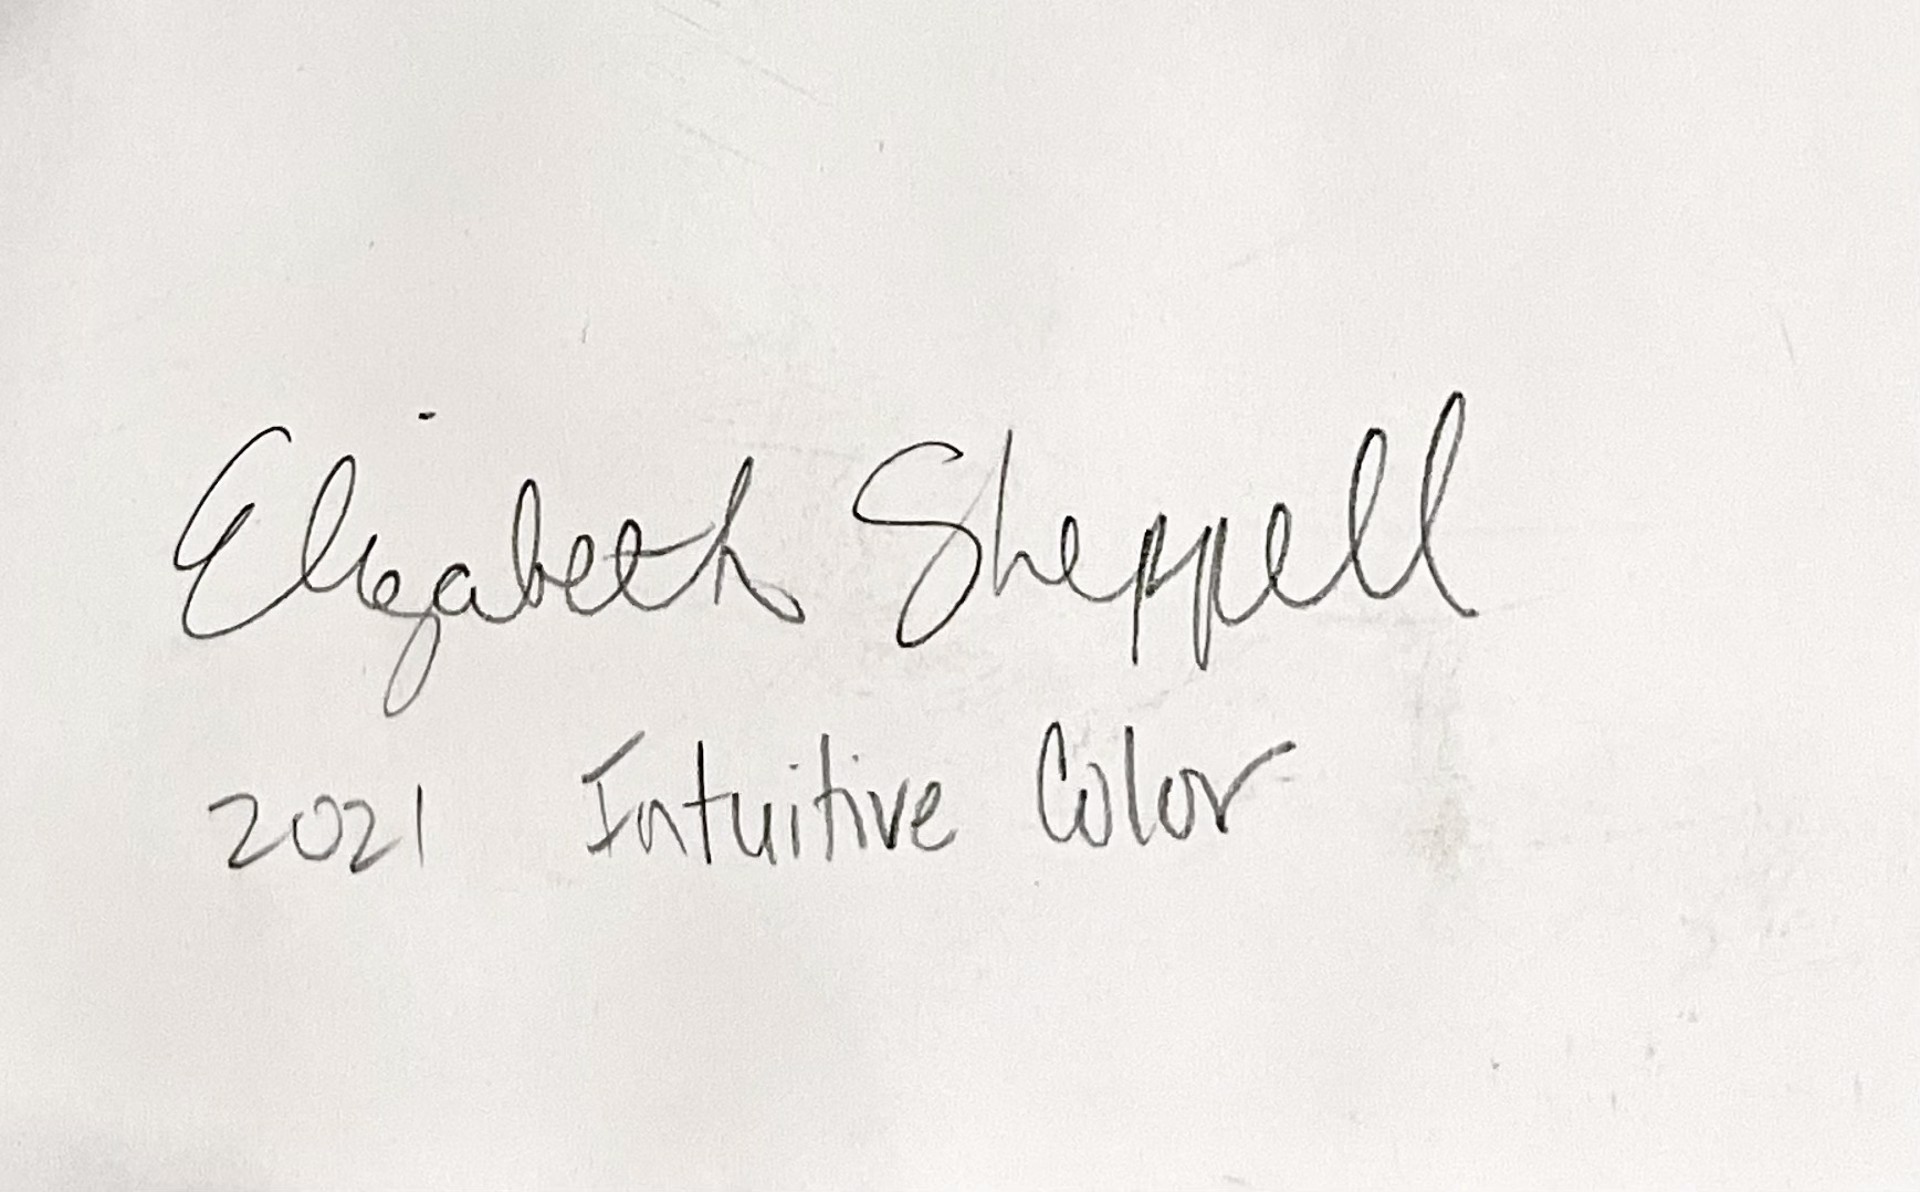 Intuitive Color by Elizabeth Sheppell